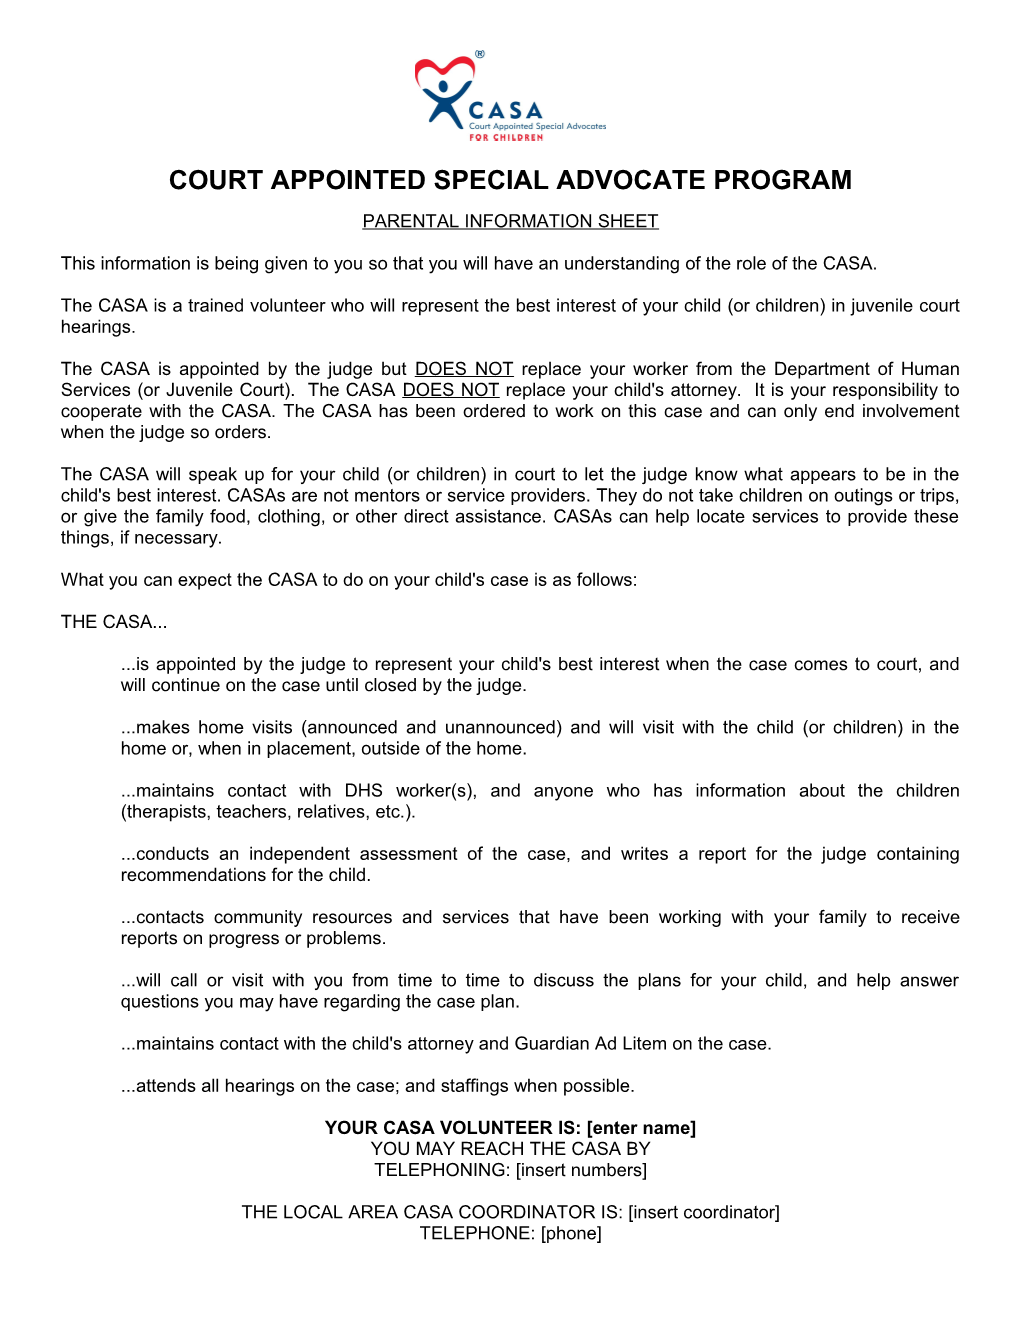 Court Appointed Special Advocate Program